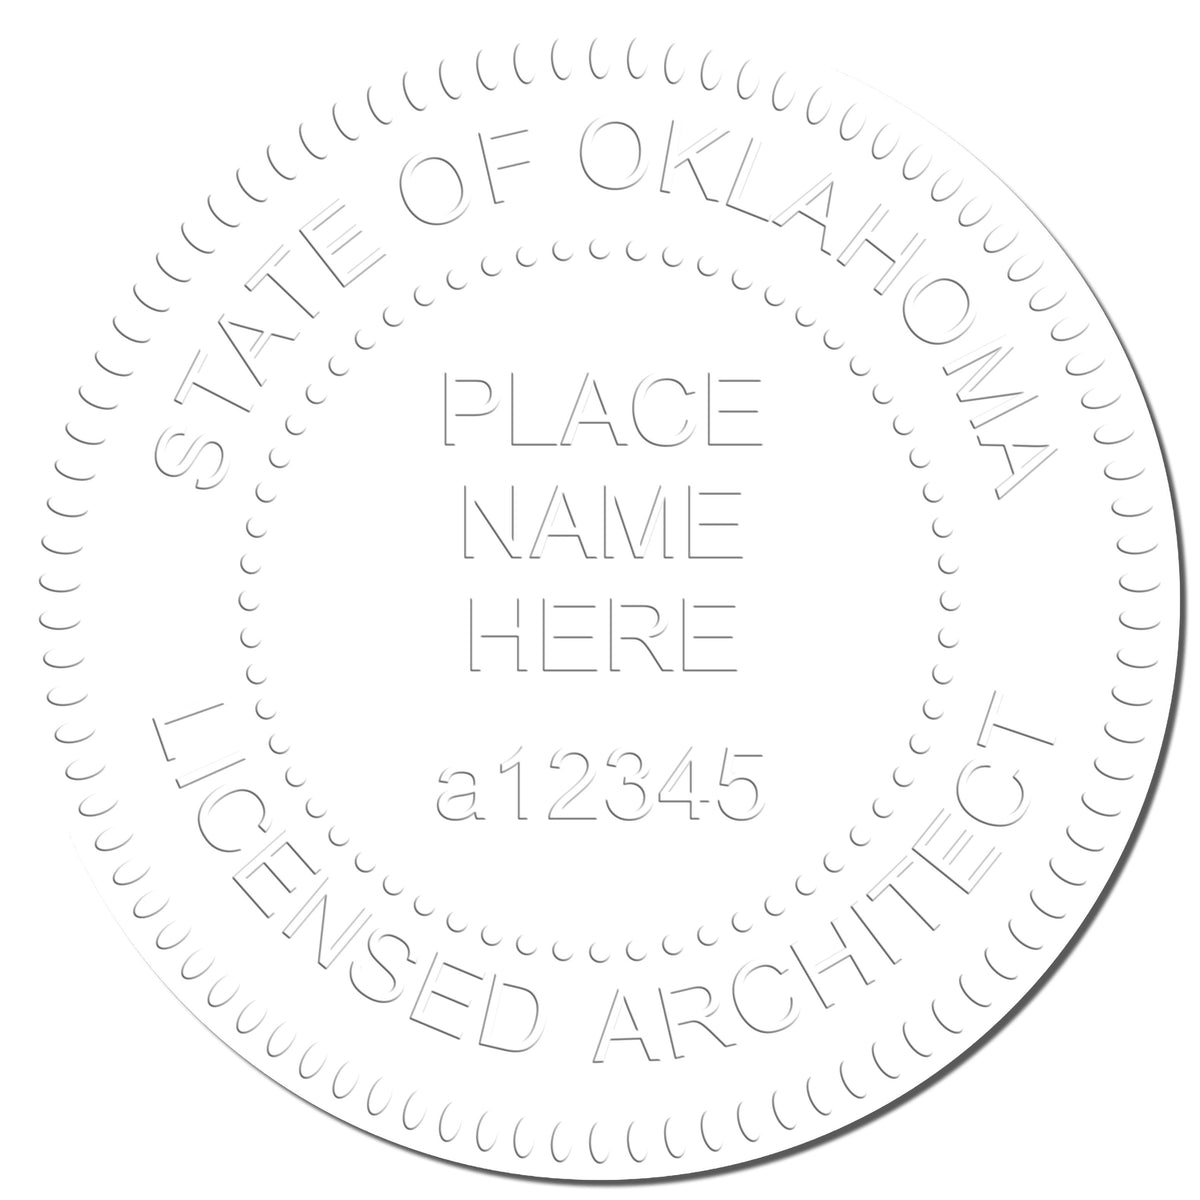 A photograph of the Extended Long Reach Oklahoma Architect Seal Embosser stamp impression reveals a vivid, professional image of the on paper.